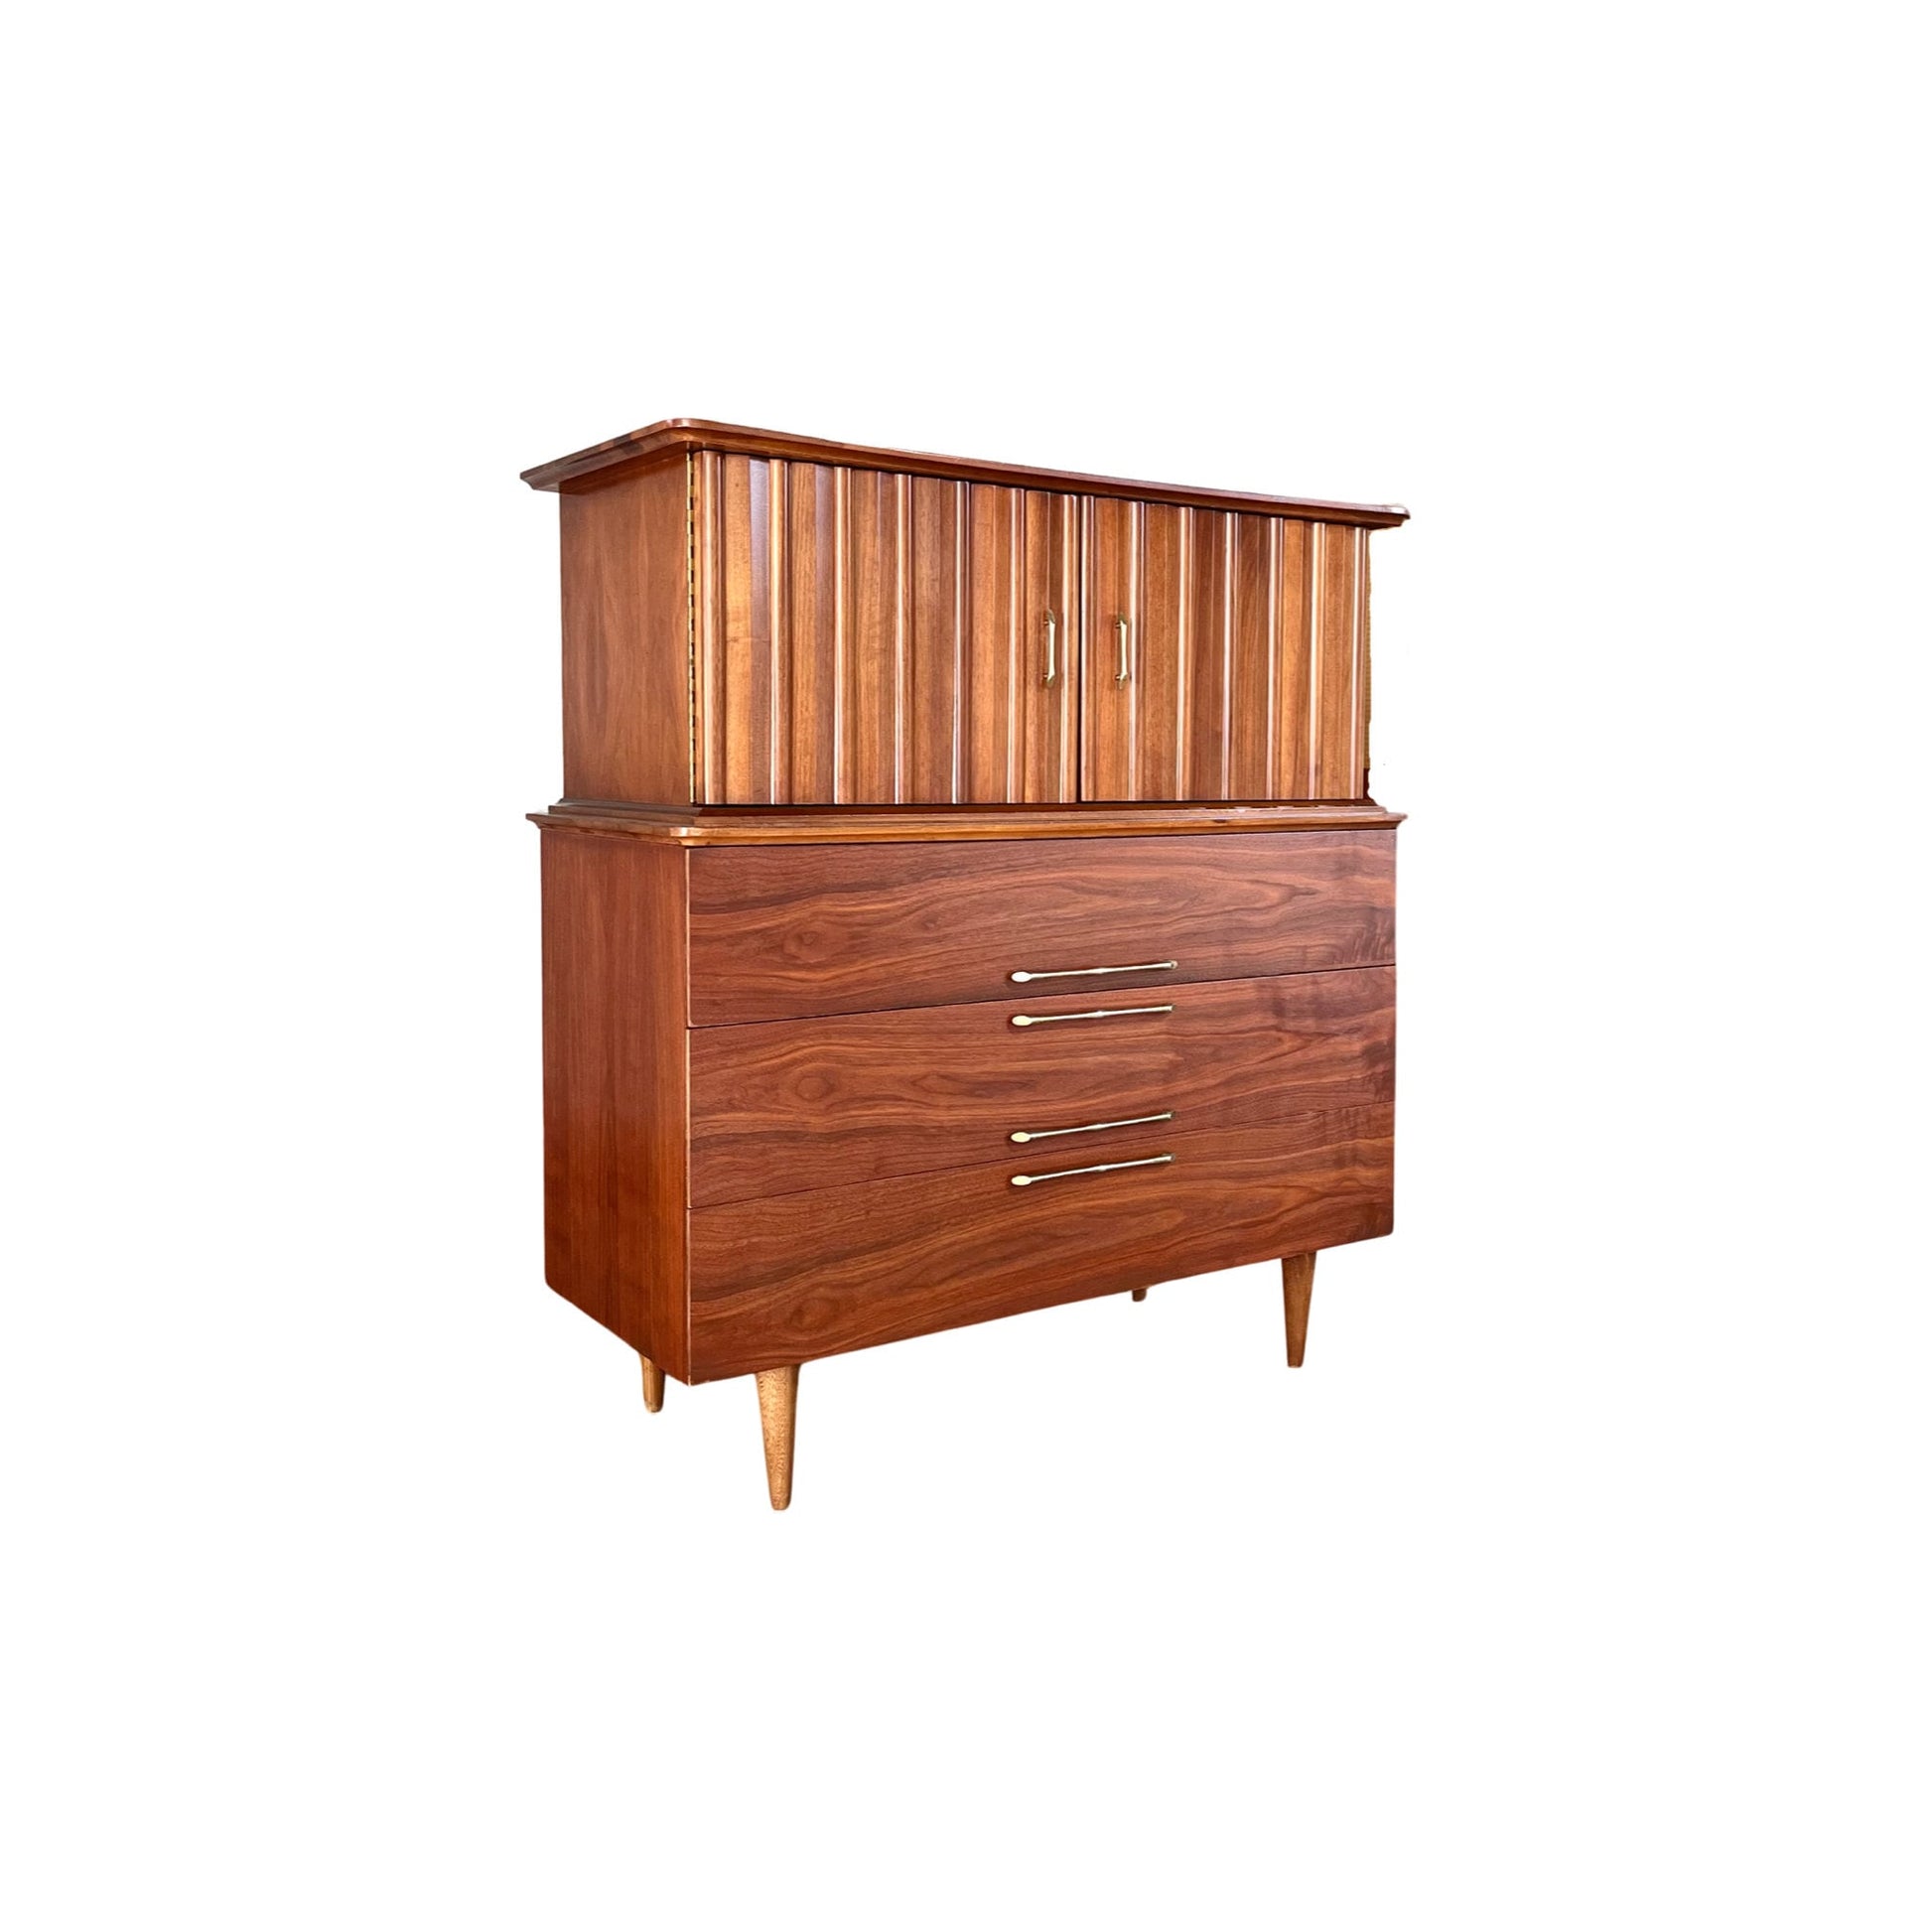 Young Manufacturing Restored Mid Century Modern Highboy Dresser - Full View